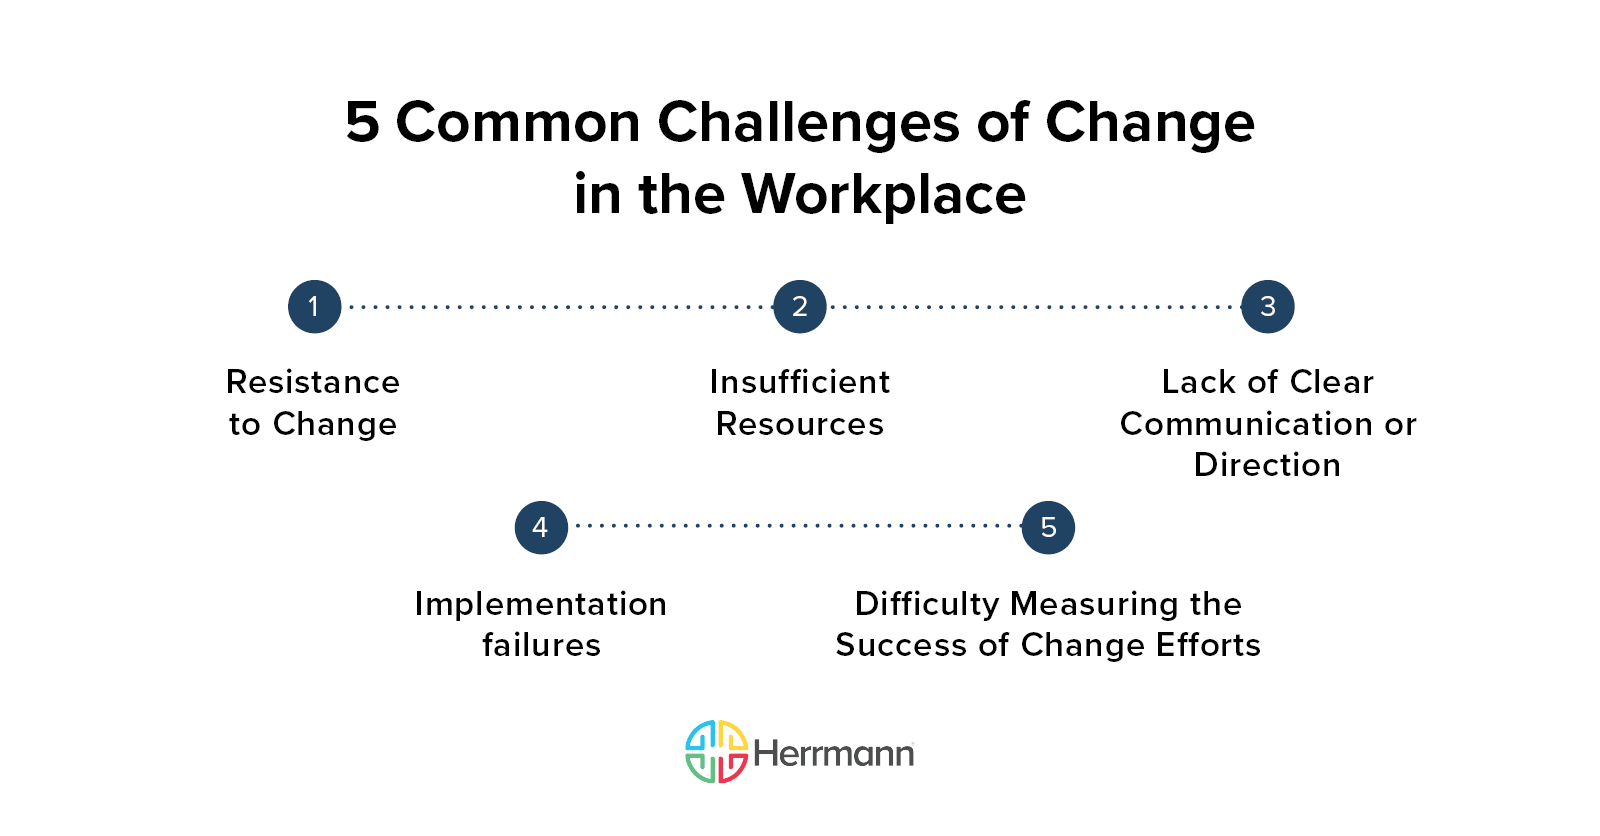 5 Common Challenges of Change in the Workplace